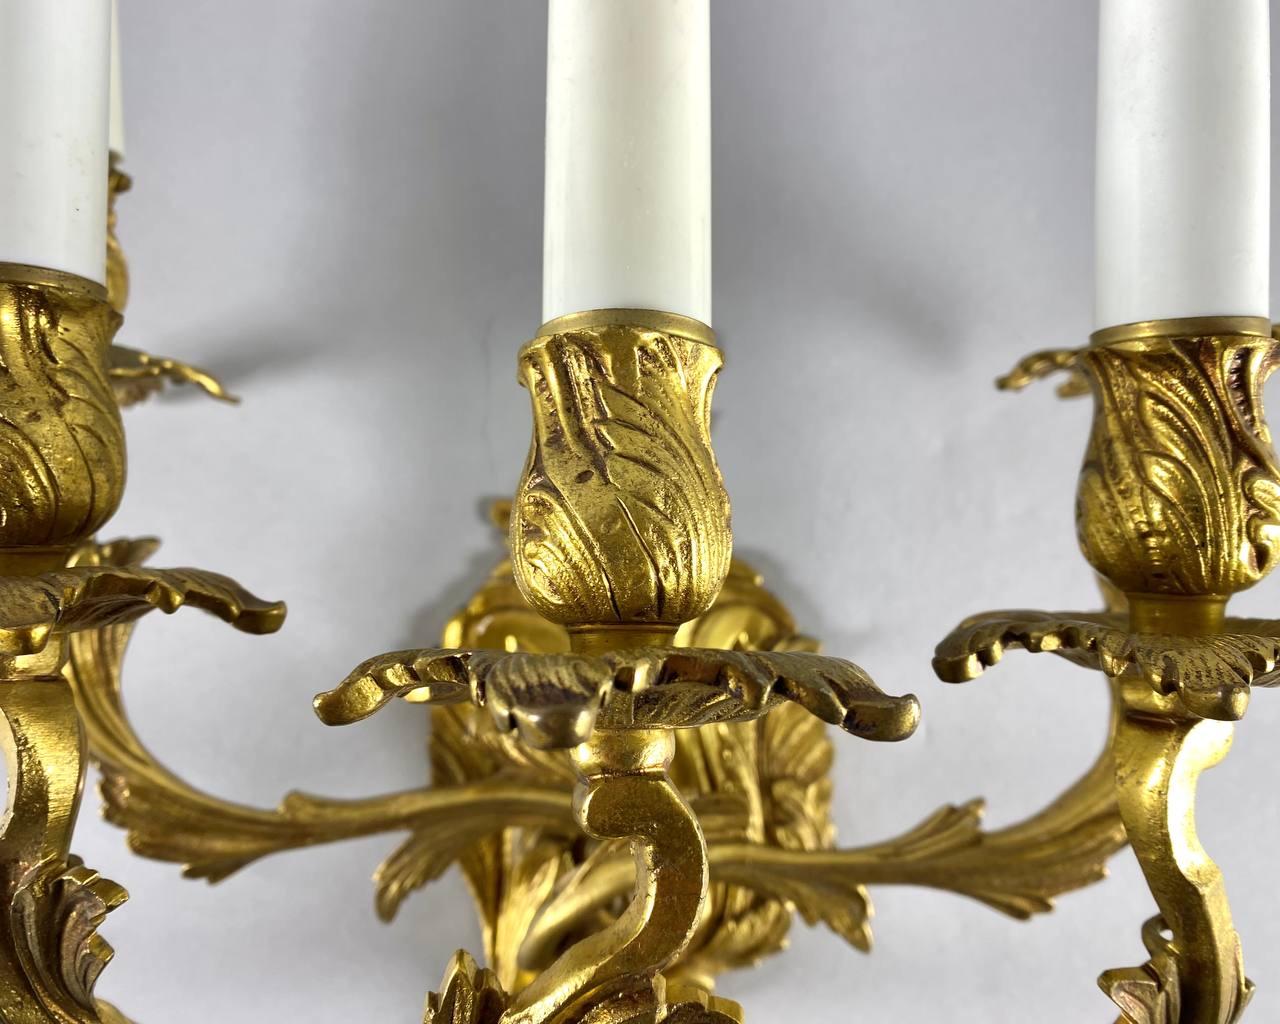 Beautiful Rococo style wall lamp with five sconces. Vintage.

Support in gilded bronze and handcrafted by craftsmen.

The decor consists of stylized acanthus scrolls intertwined with the Rococo style.

Decorative details made of cast bronze